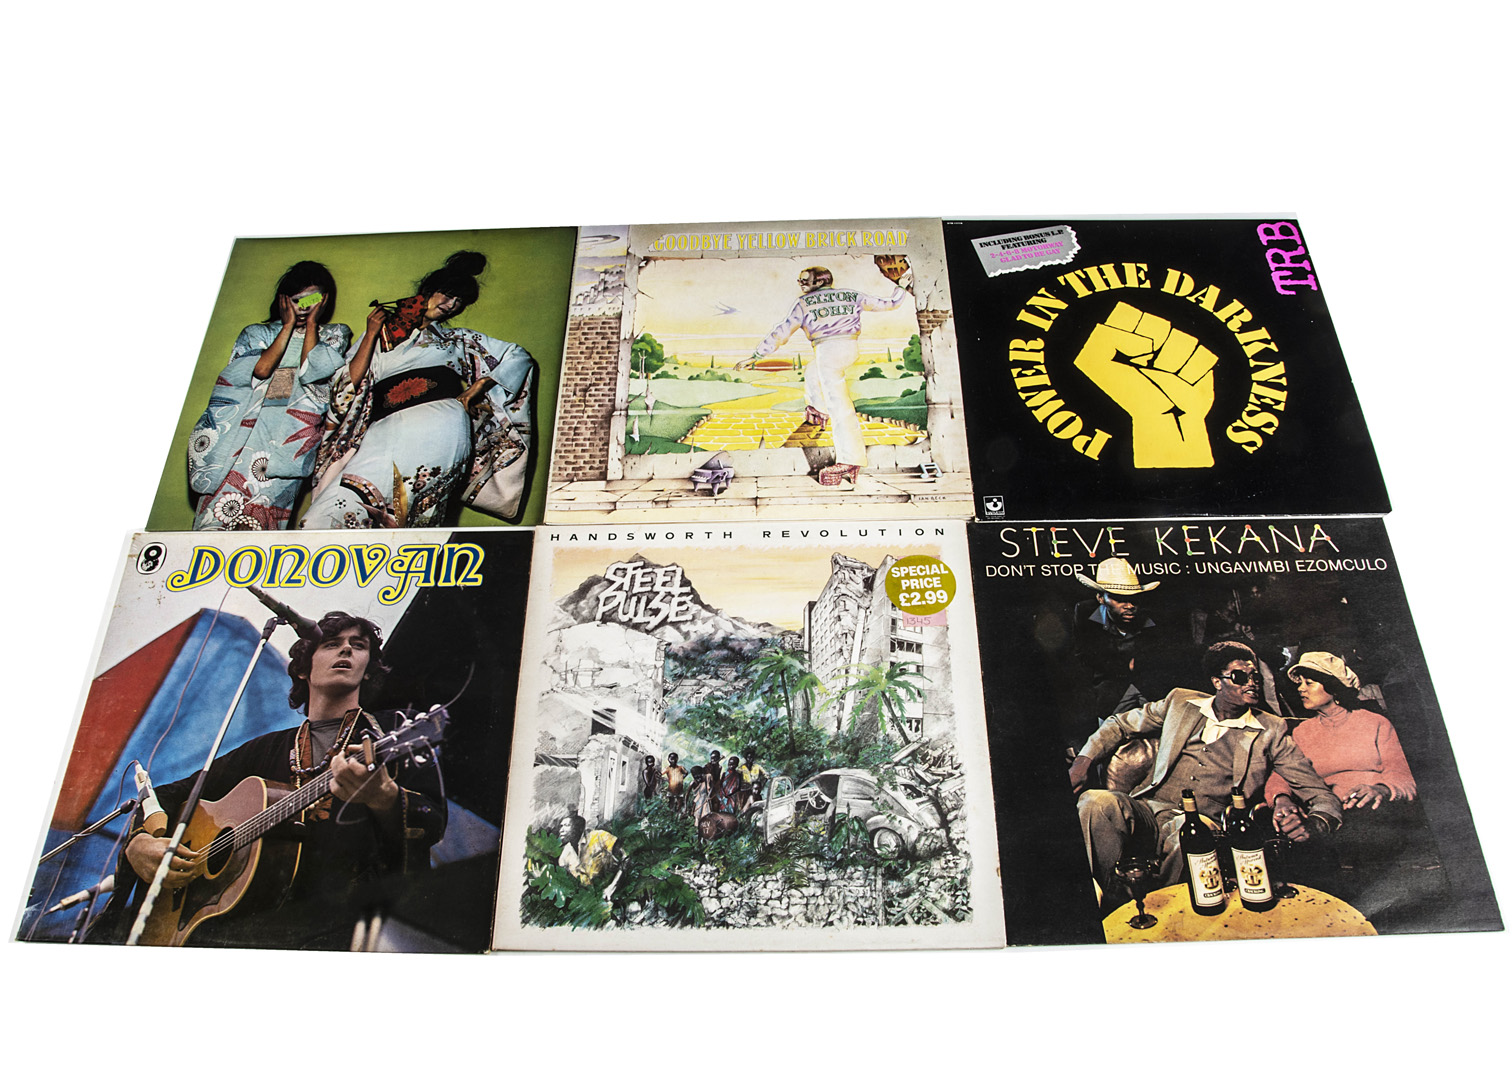 LP Records, approximately one hundred and thirty albums and four box sets of various genres with